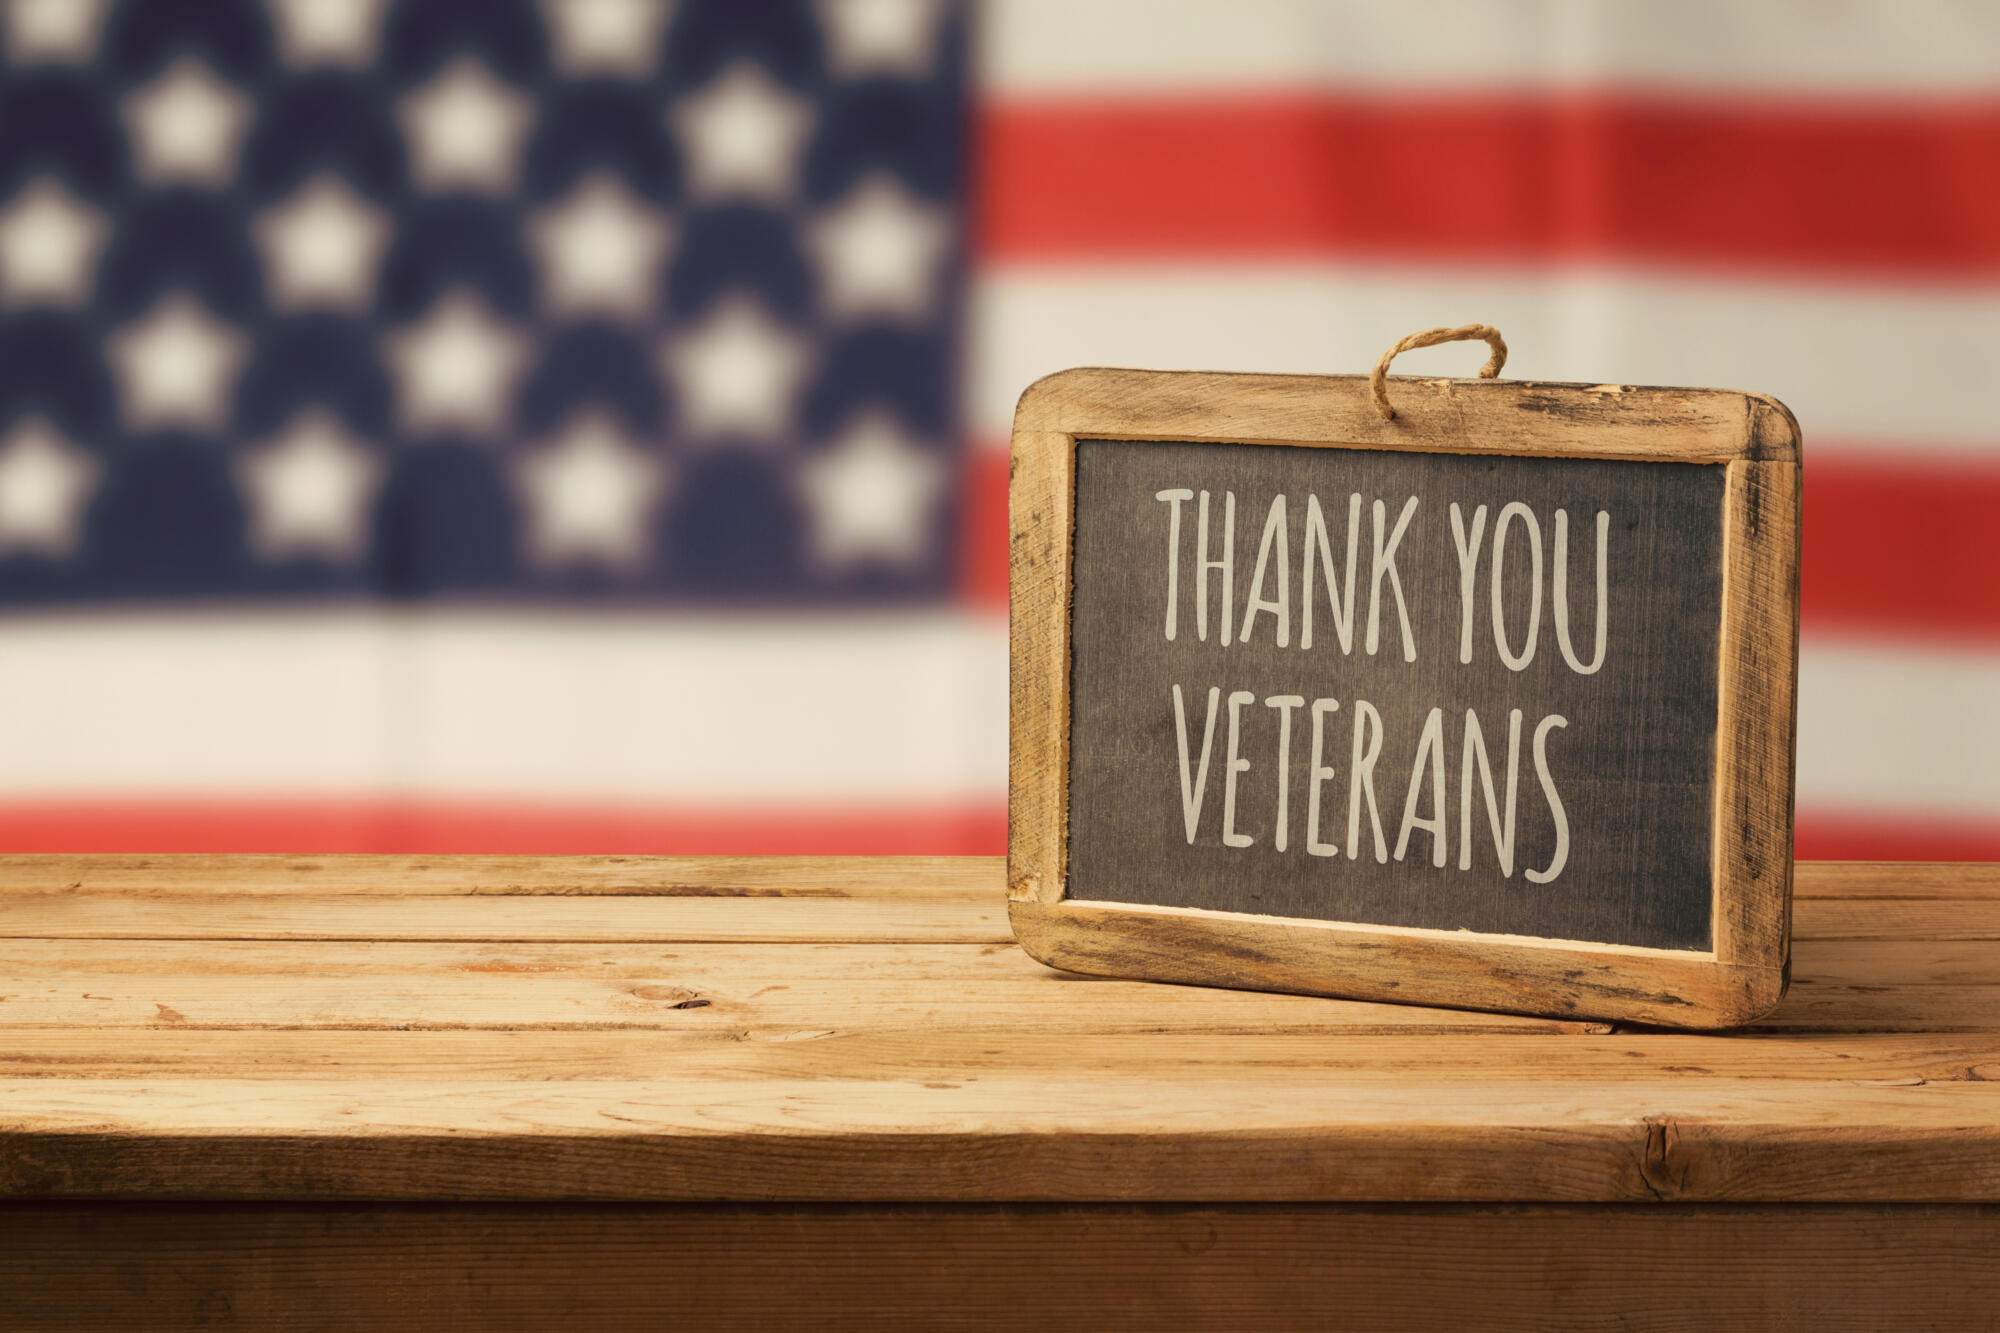 A wooden board featuring a patriotic American flag and the heartfelt words "thank you" to veterans.